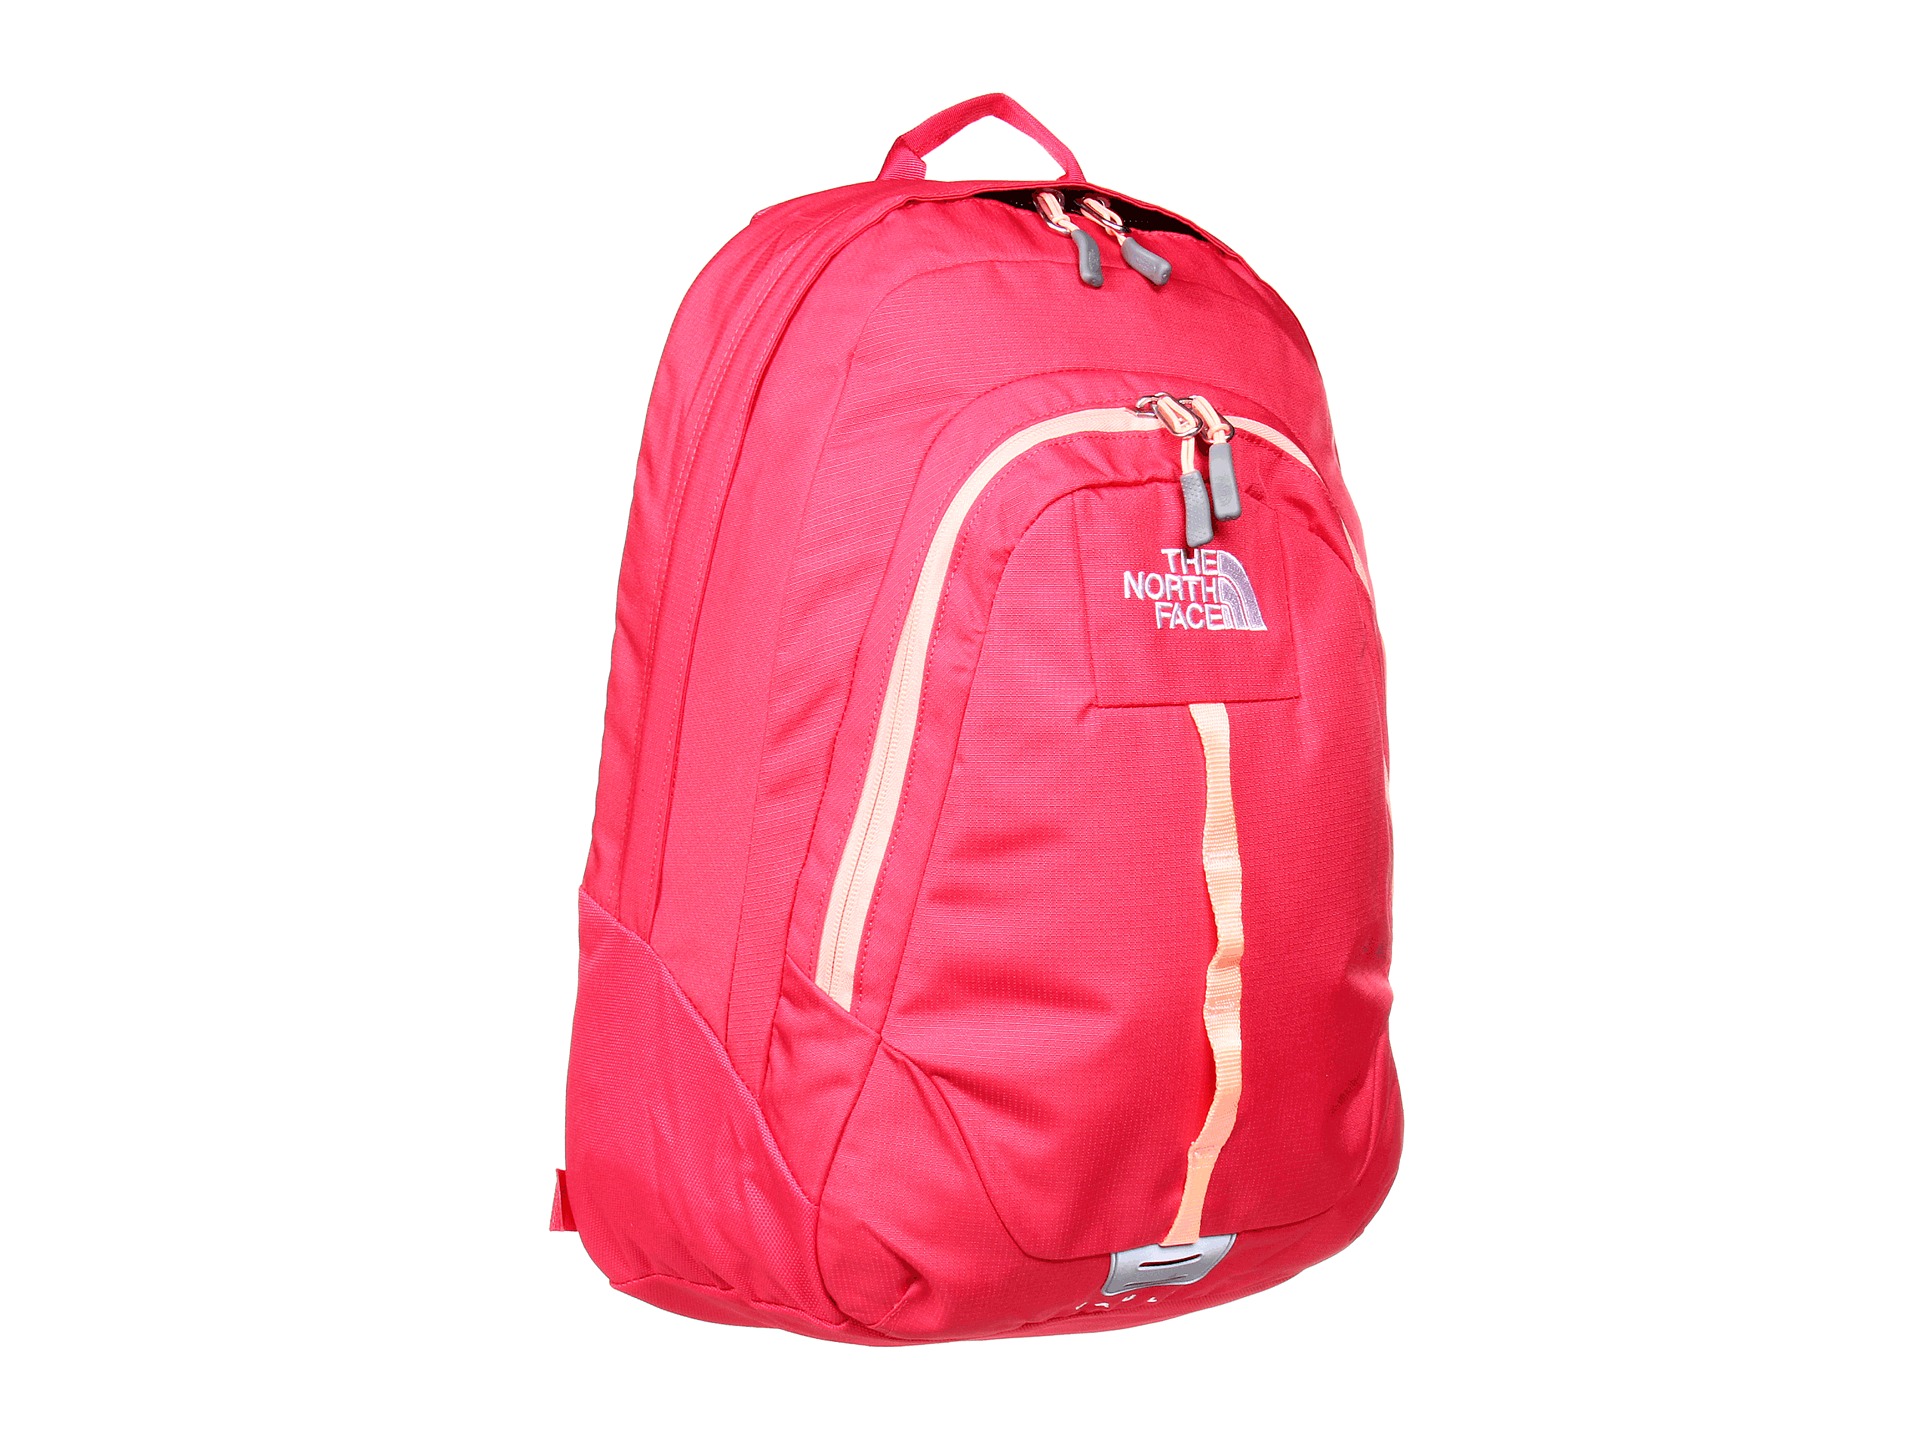 the north face women s vault $ 55 00 rated